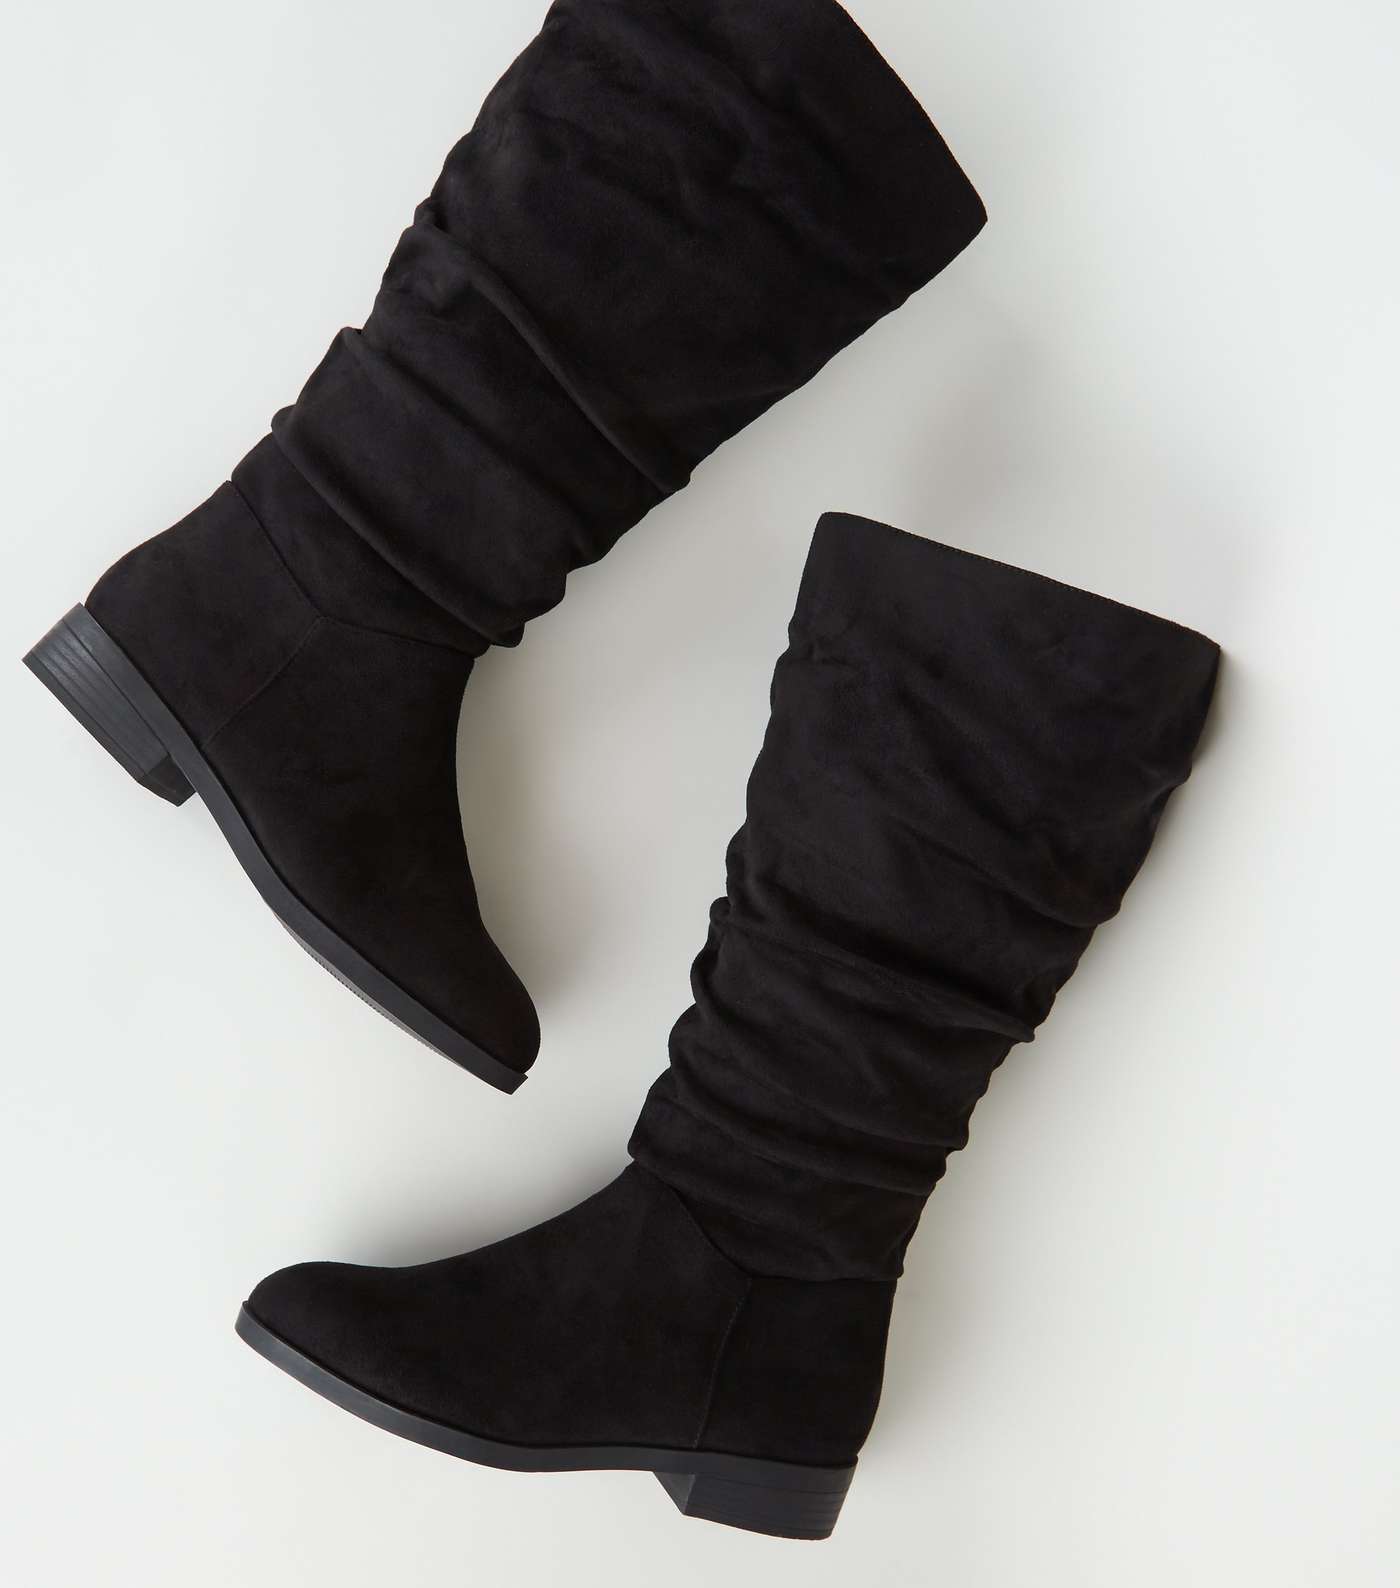 Extra Calf Fit Black Suedette Knee High Boots Image 3